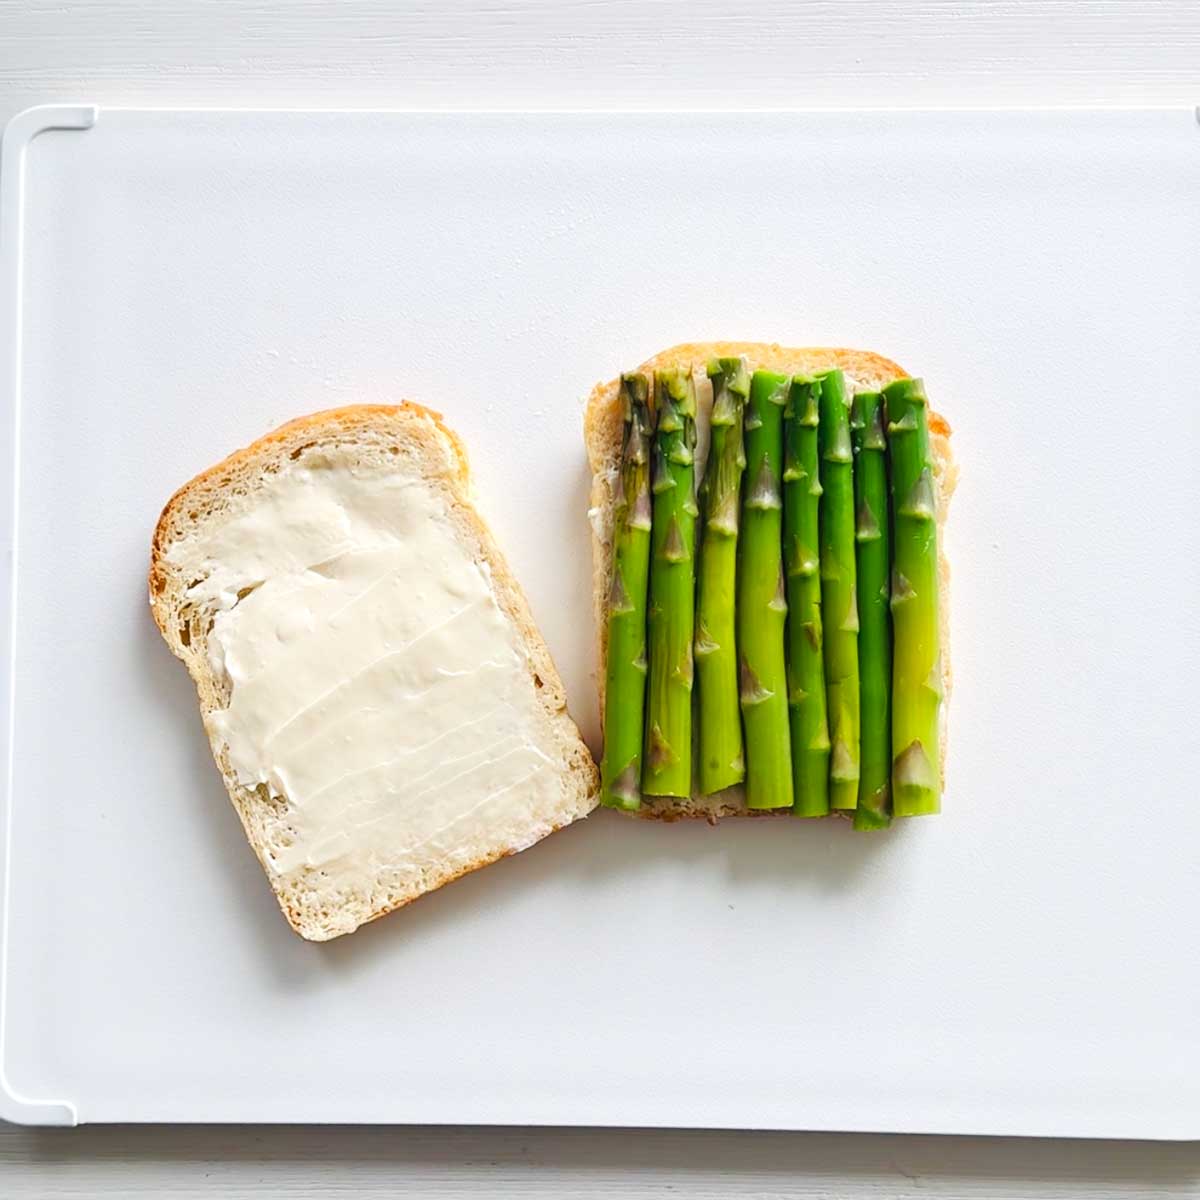 How to Make Asparagus Finger Sandwiches (just 3-Ingredients!) - Sweet Potatoes in the Microwave